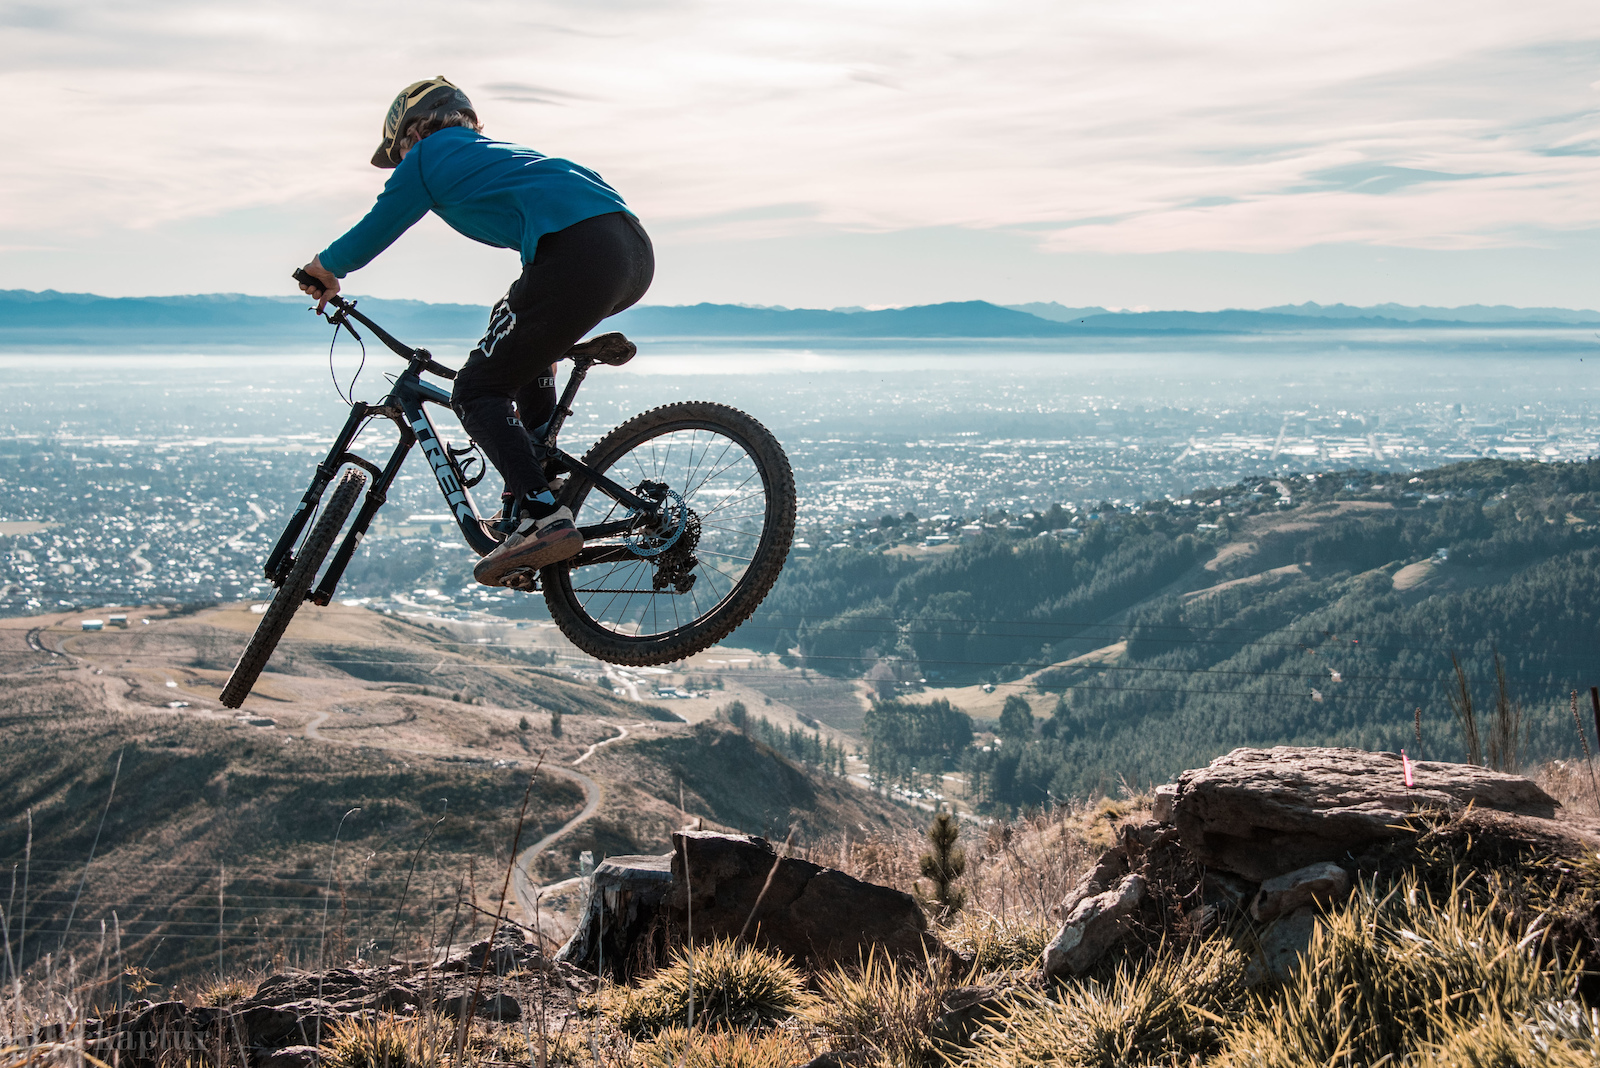 Lui steezes his way over small rock drop/step down on the amazing Throw the Goat trail at the Christchurch Adventure Park with views over Christchurch City and the Mountains in the distance...